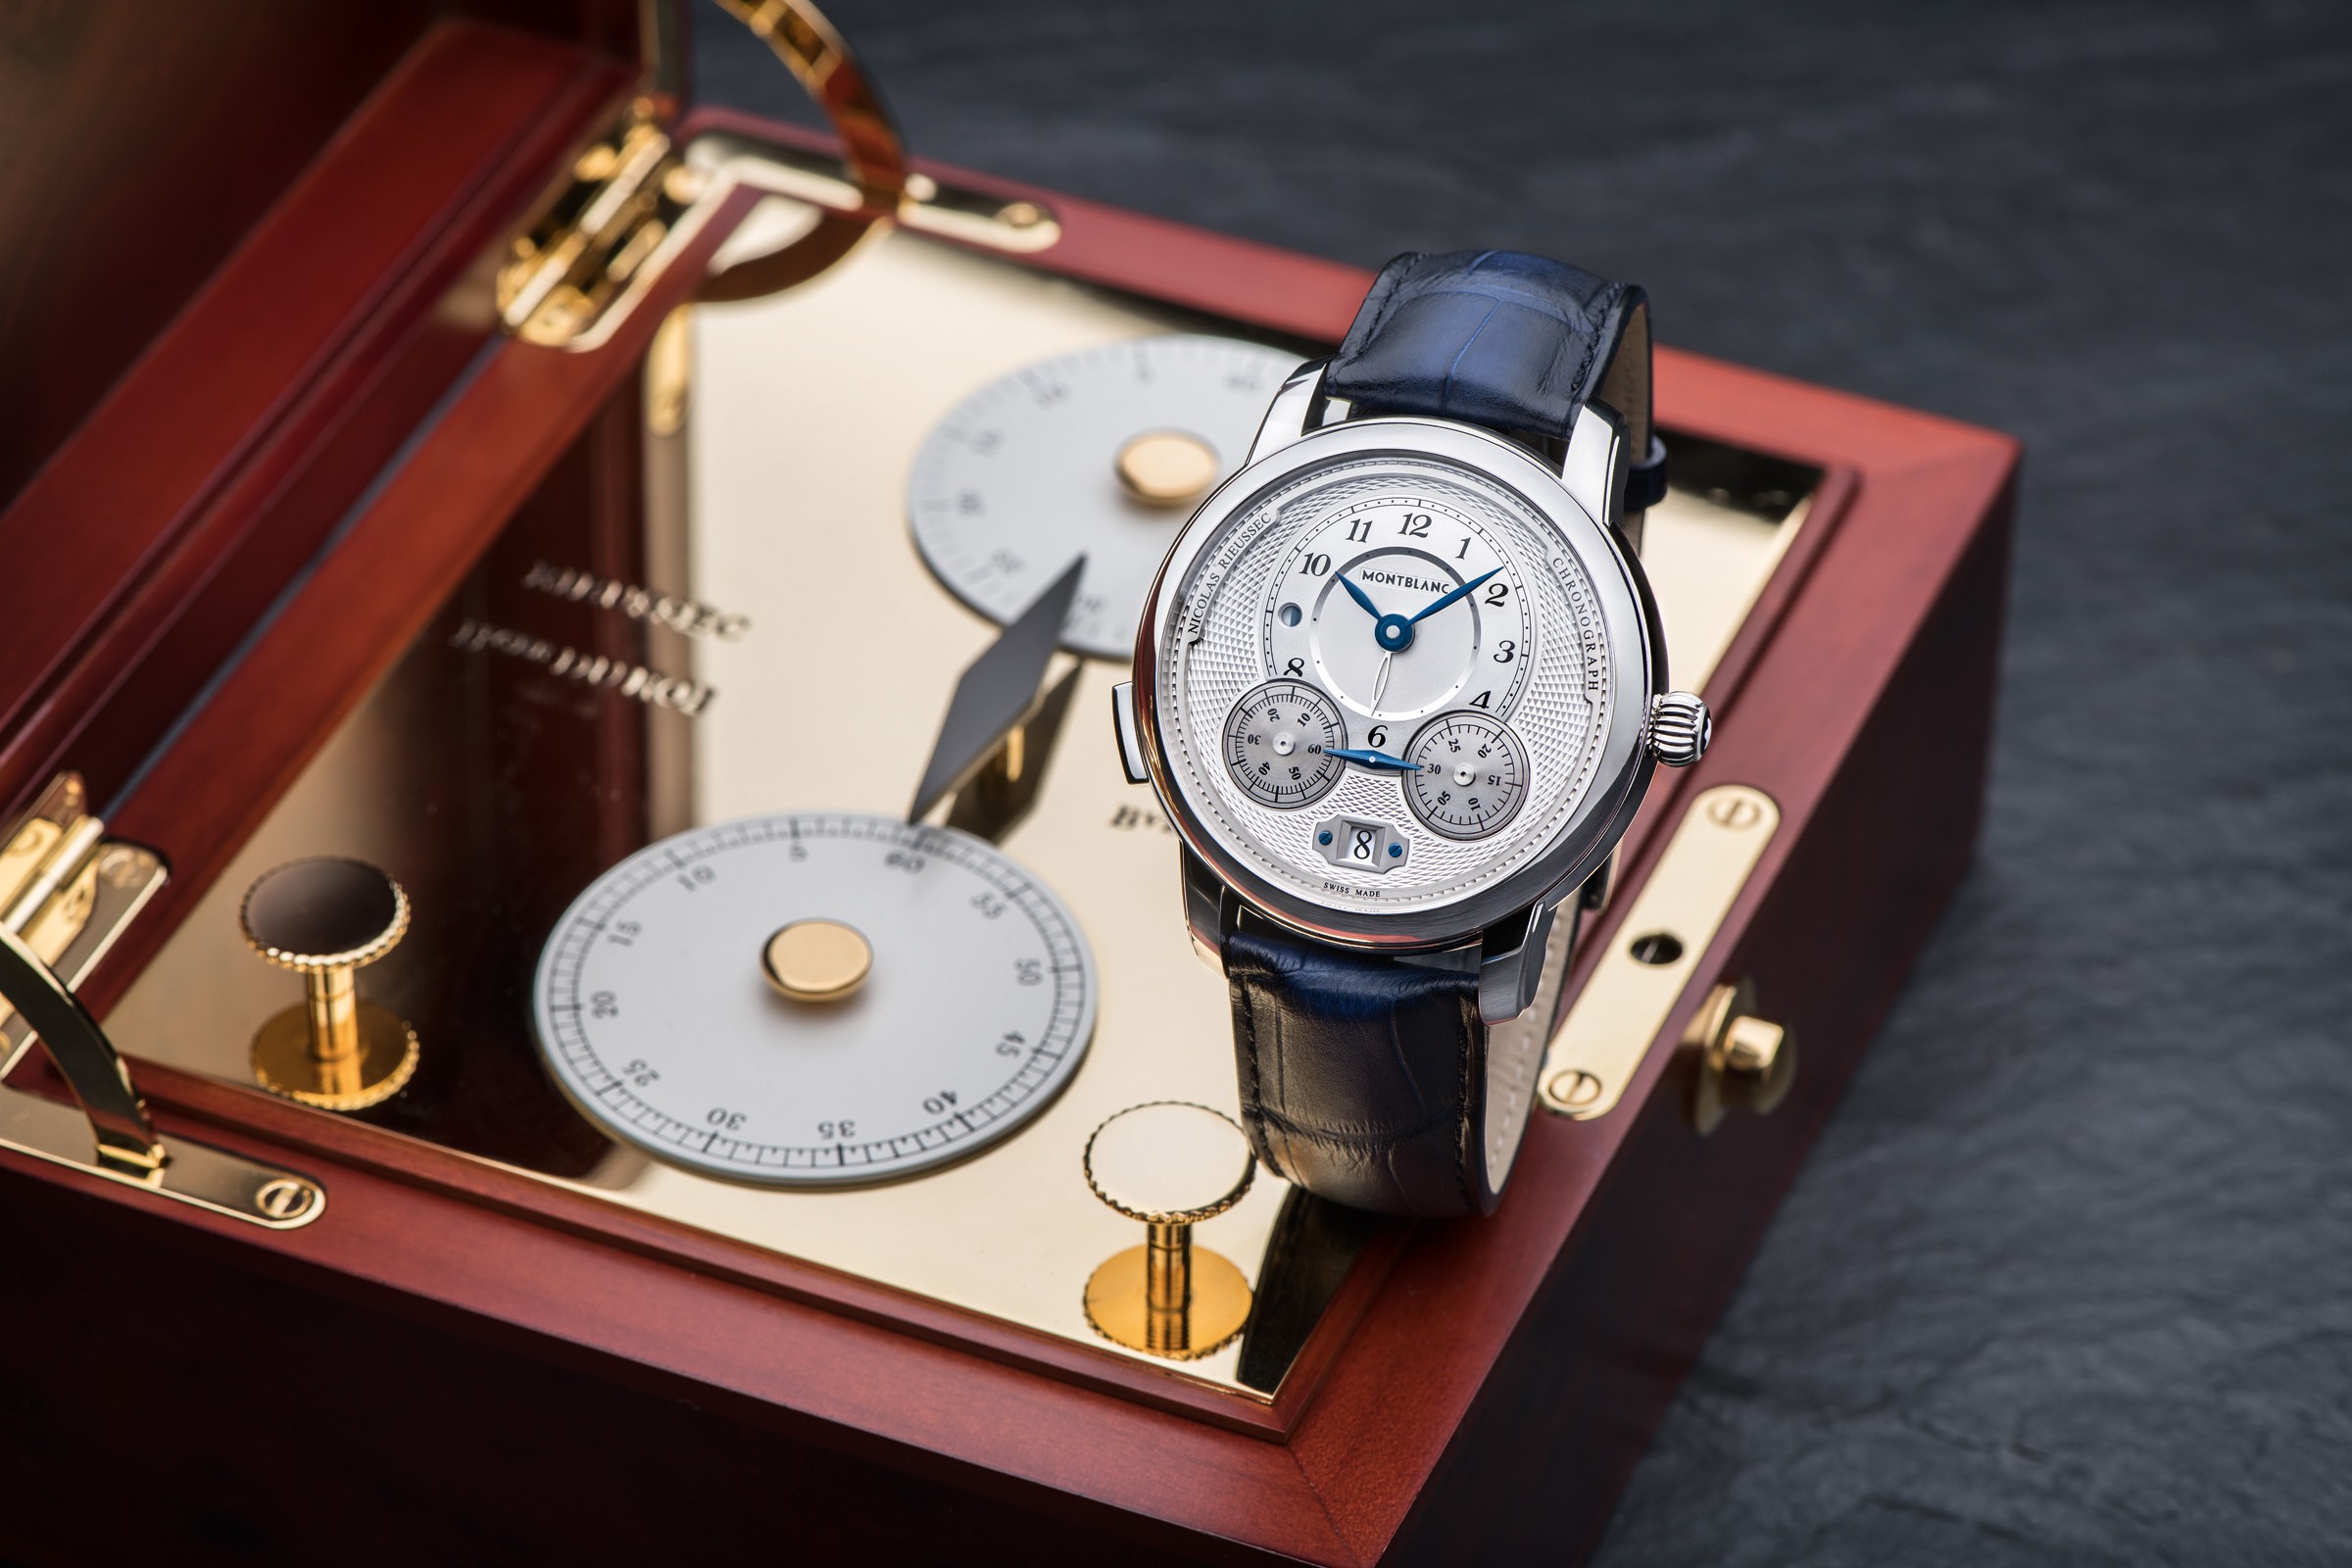 Montblanc’s Nicolas Rieussec Chronograph from the Star Legacy collection.